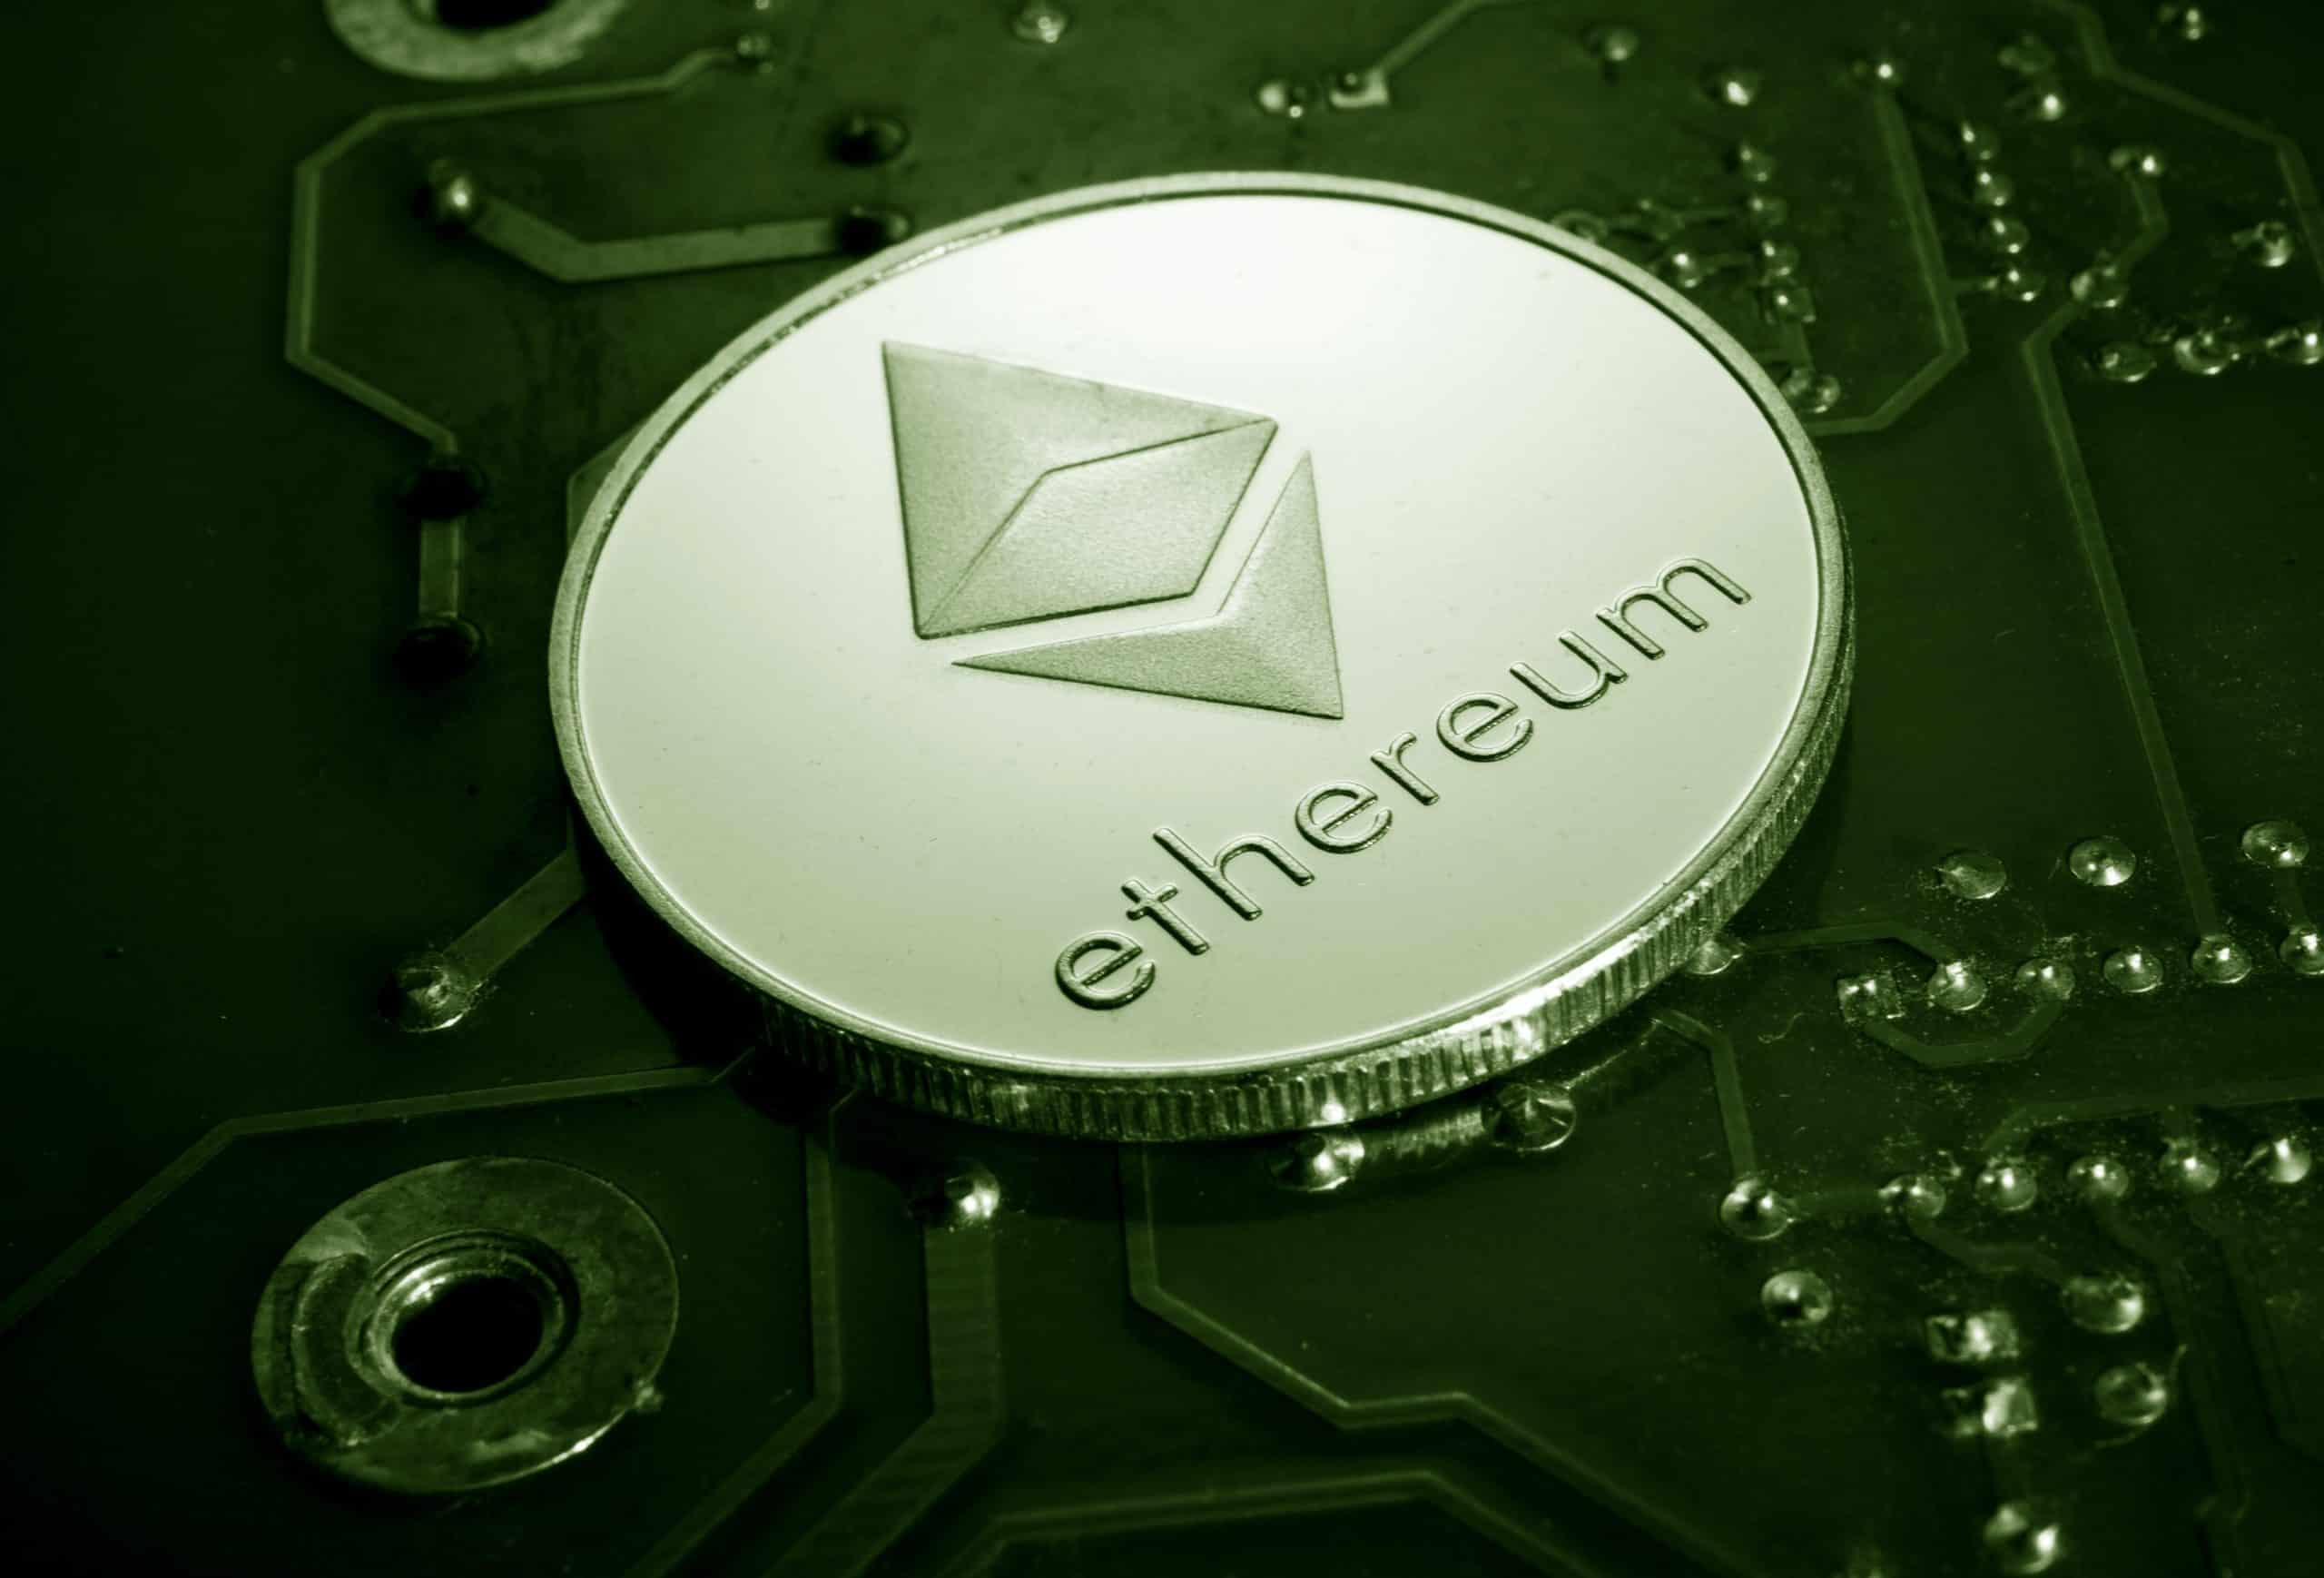 Everything you need to know about Ethereum